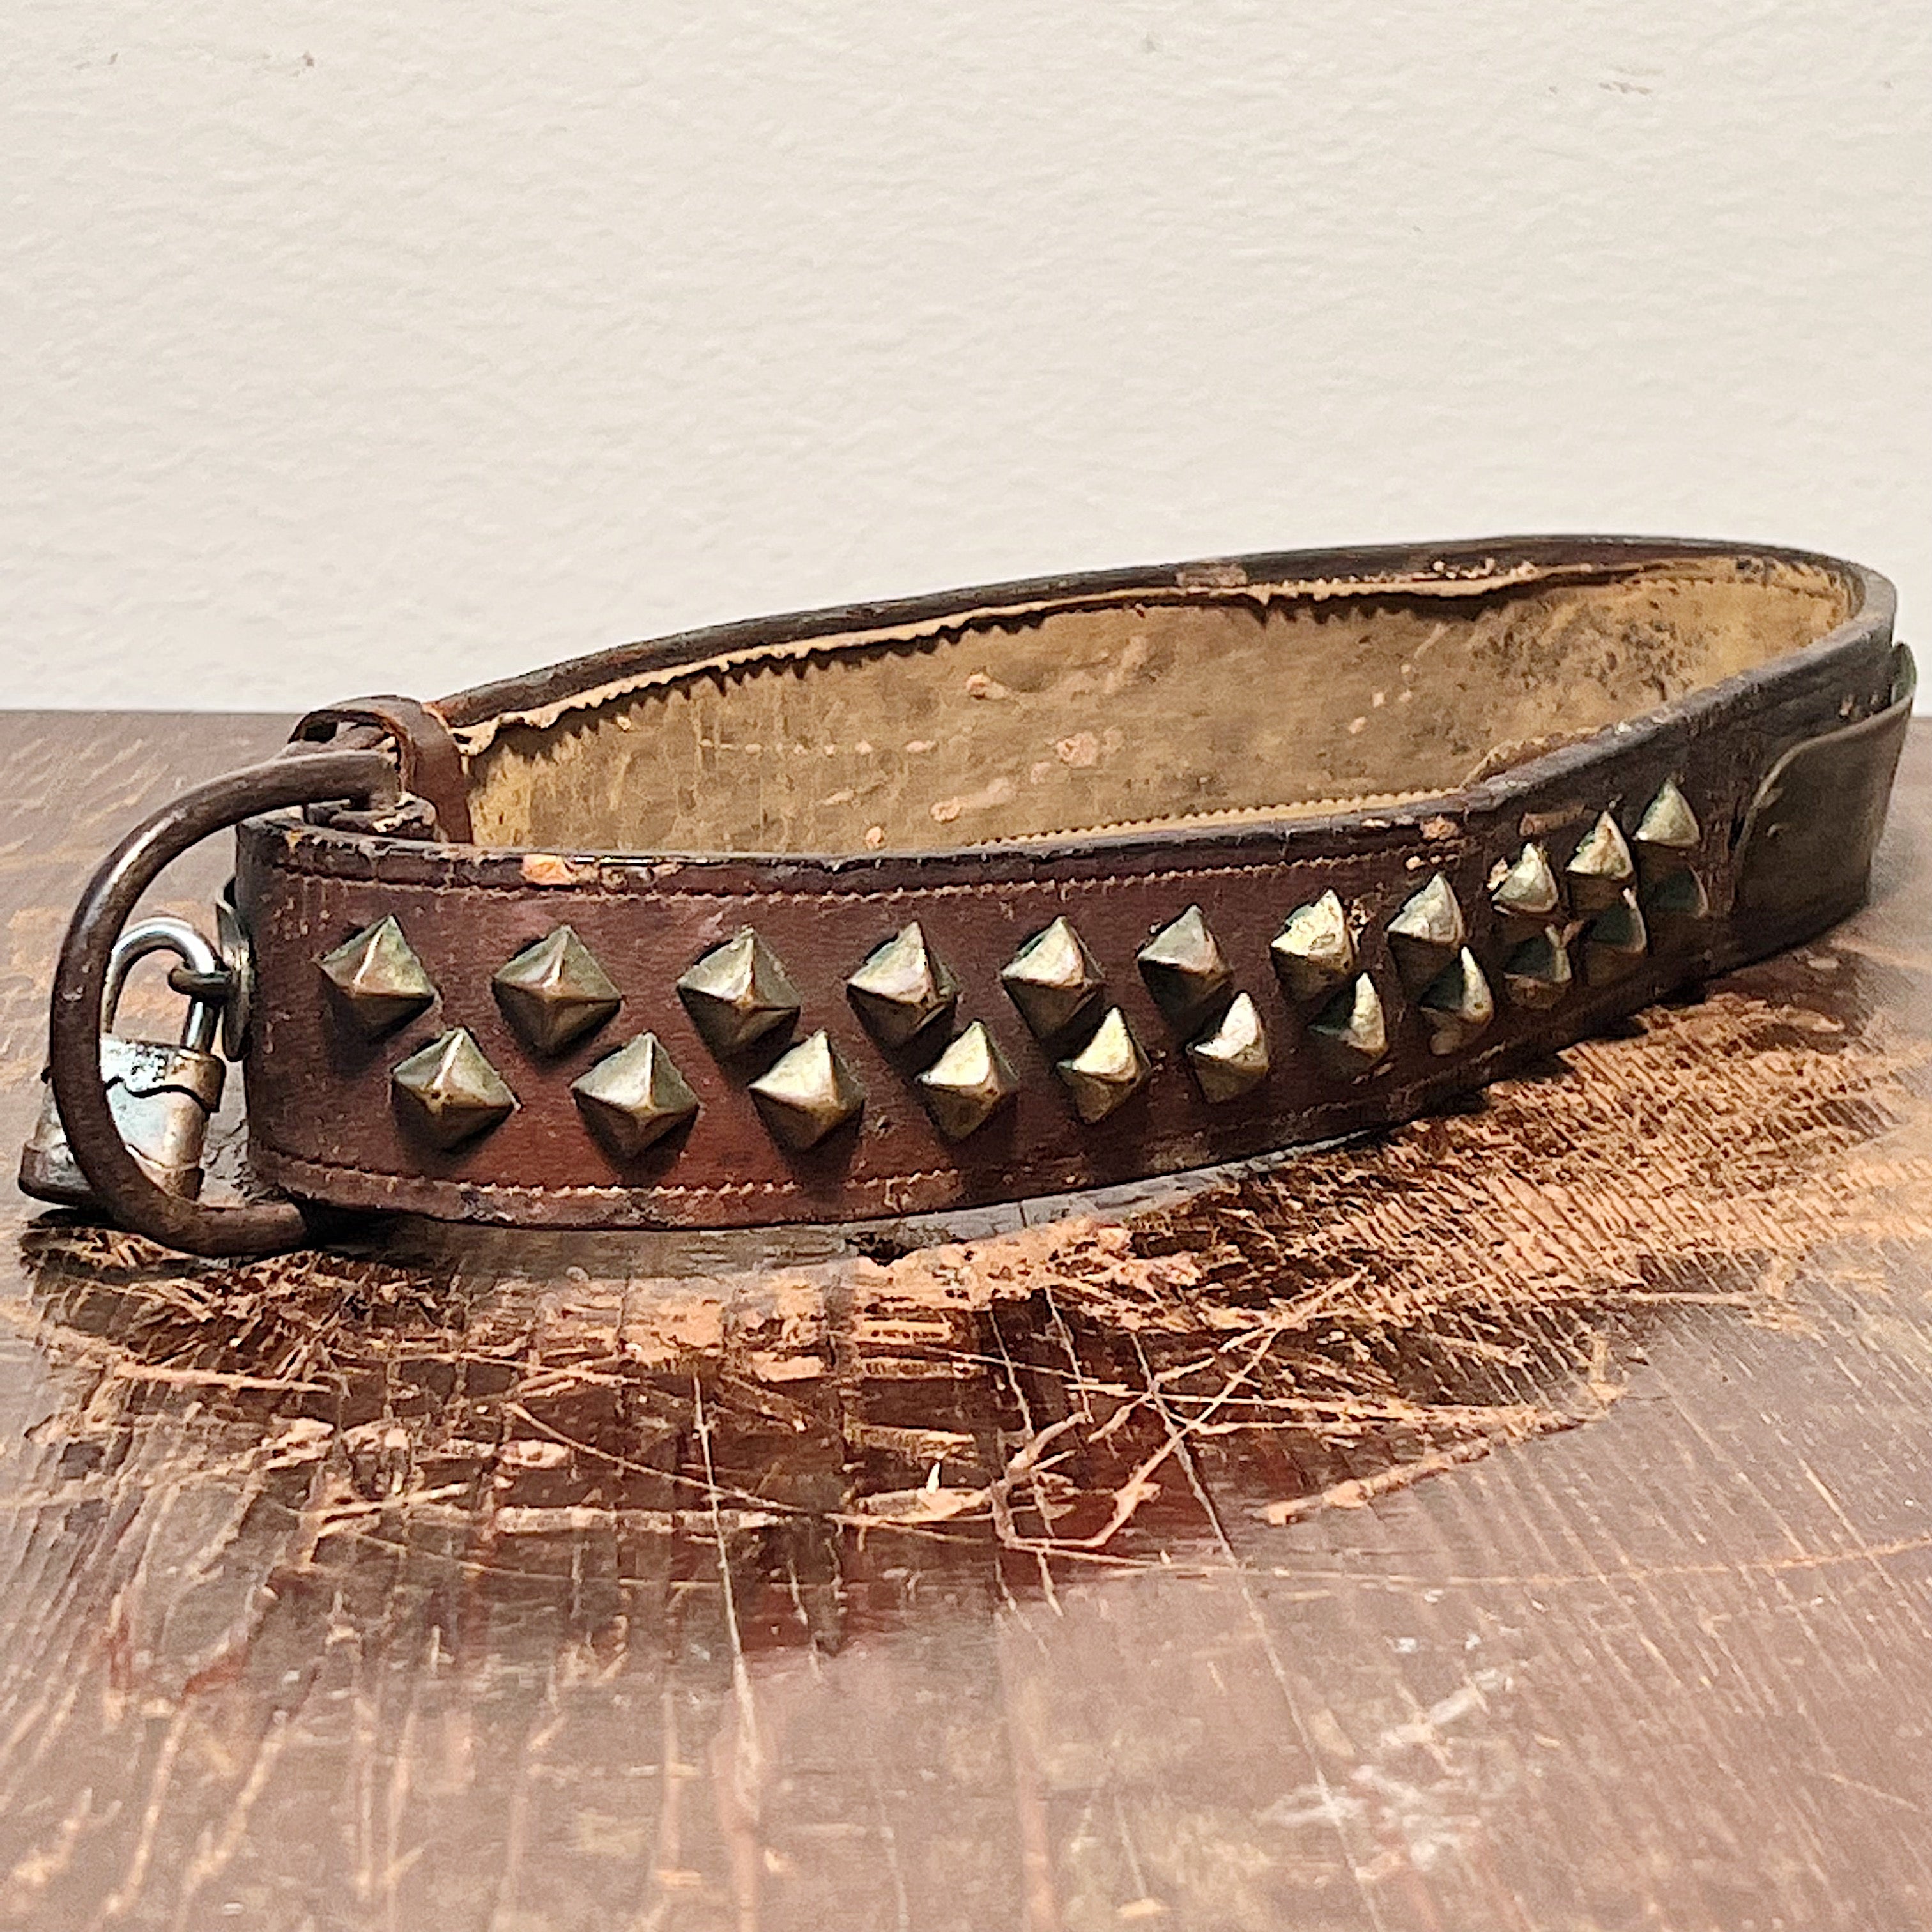 Antique Studded Dog Collar with "Victor Hugo Jr" Tag - Early 1900s Leather Buckle Collars - Punk Rock Style - Rare Bulldog Collectible